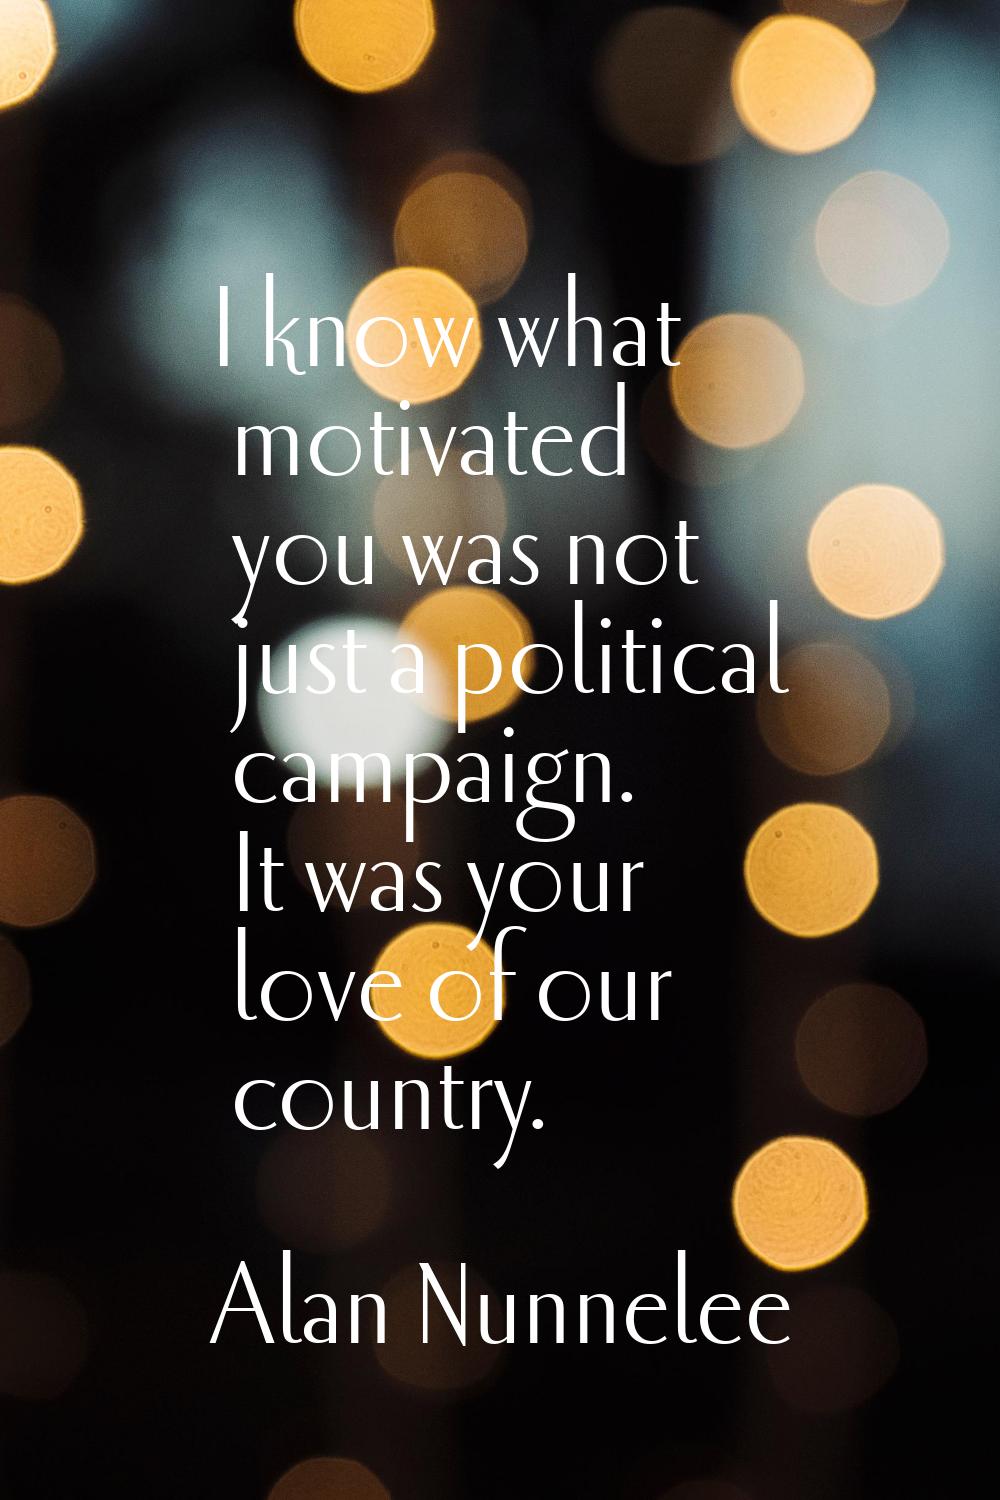 I know what motivated you was not just a political campaign. It was your love of our country.